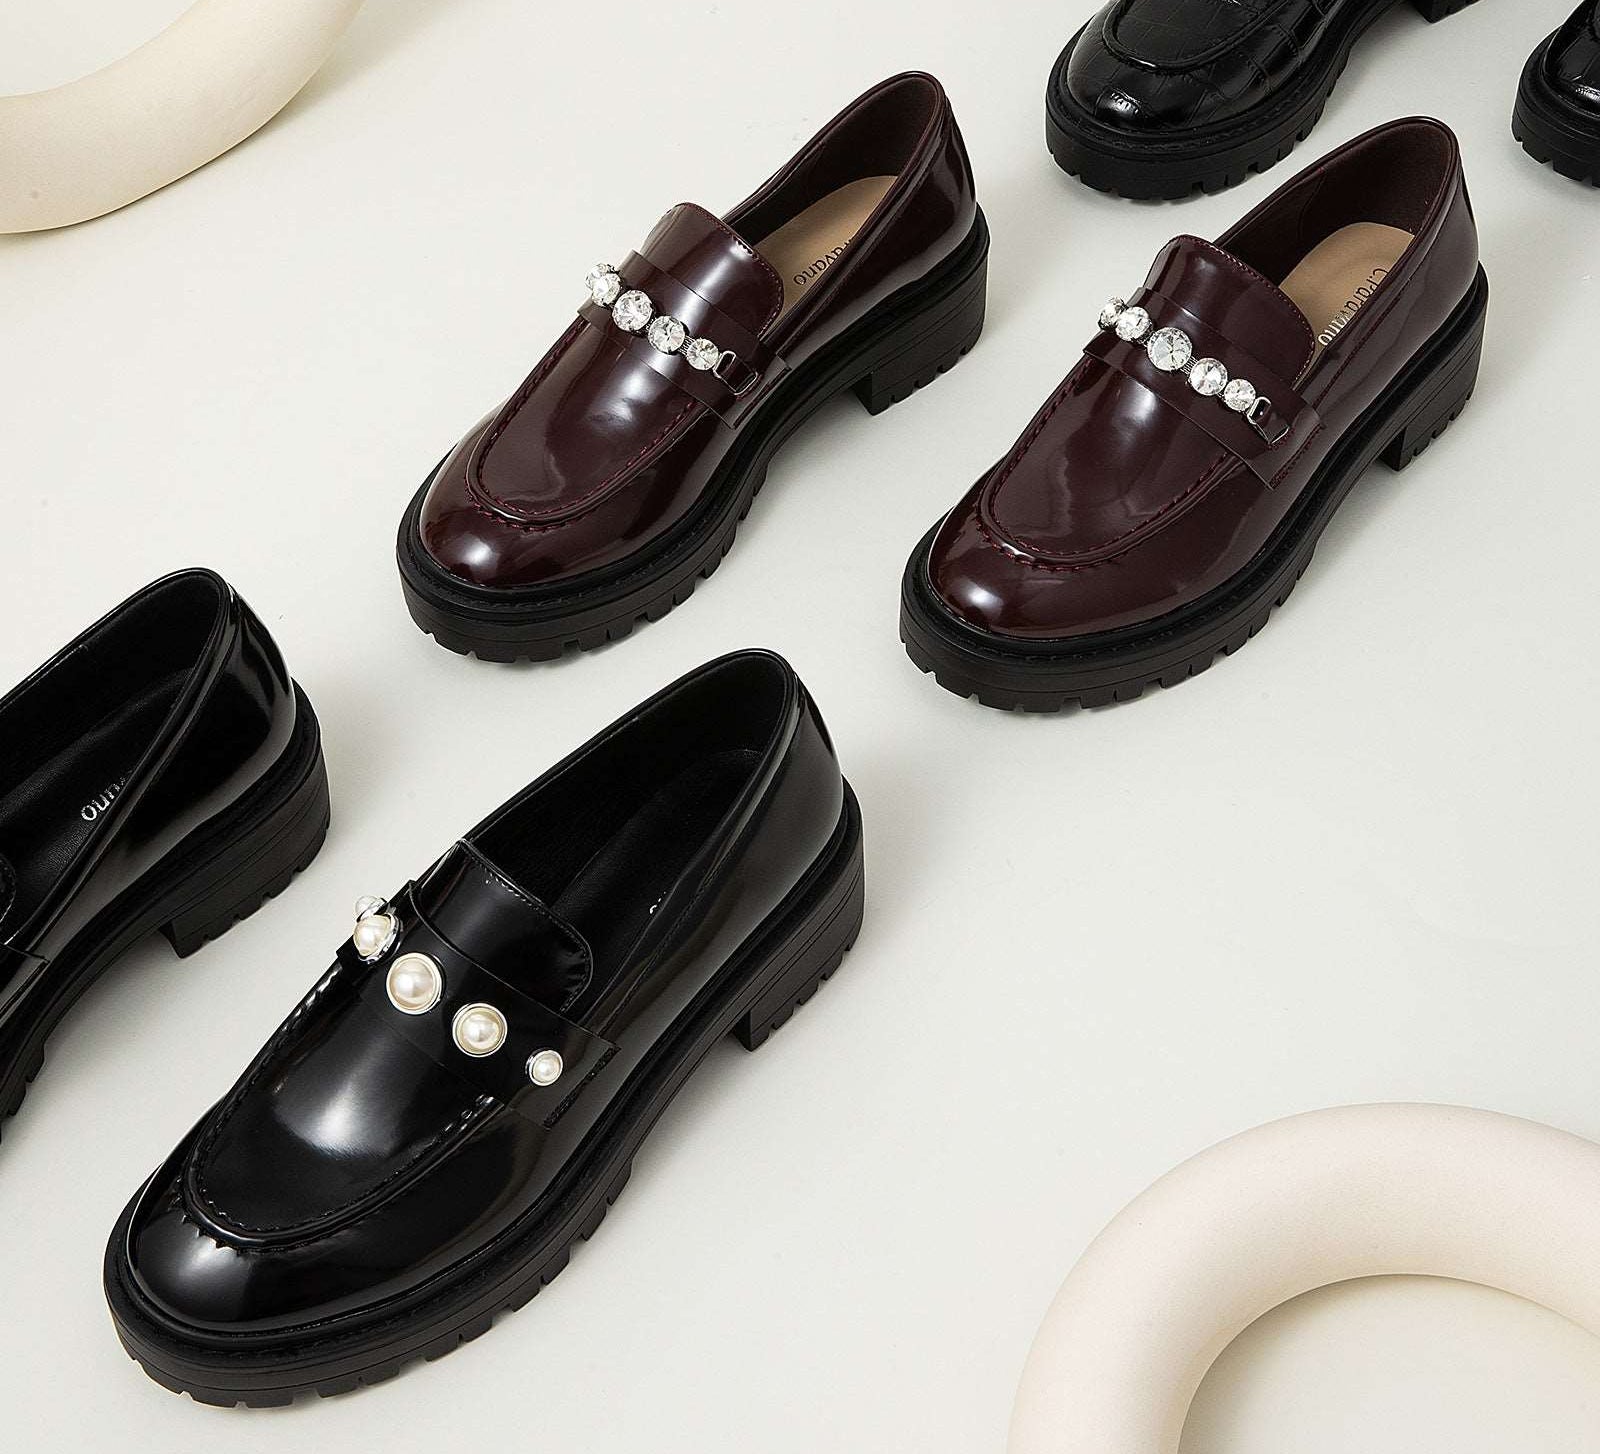 Edgy Minimalism: Platform Loafers in Black with distinctive pearl details, a chic and minimalist addition to your footwear collection.